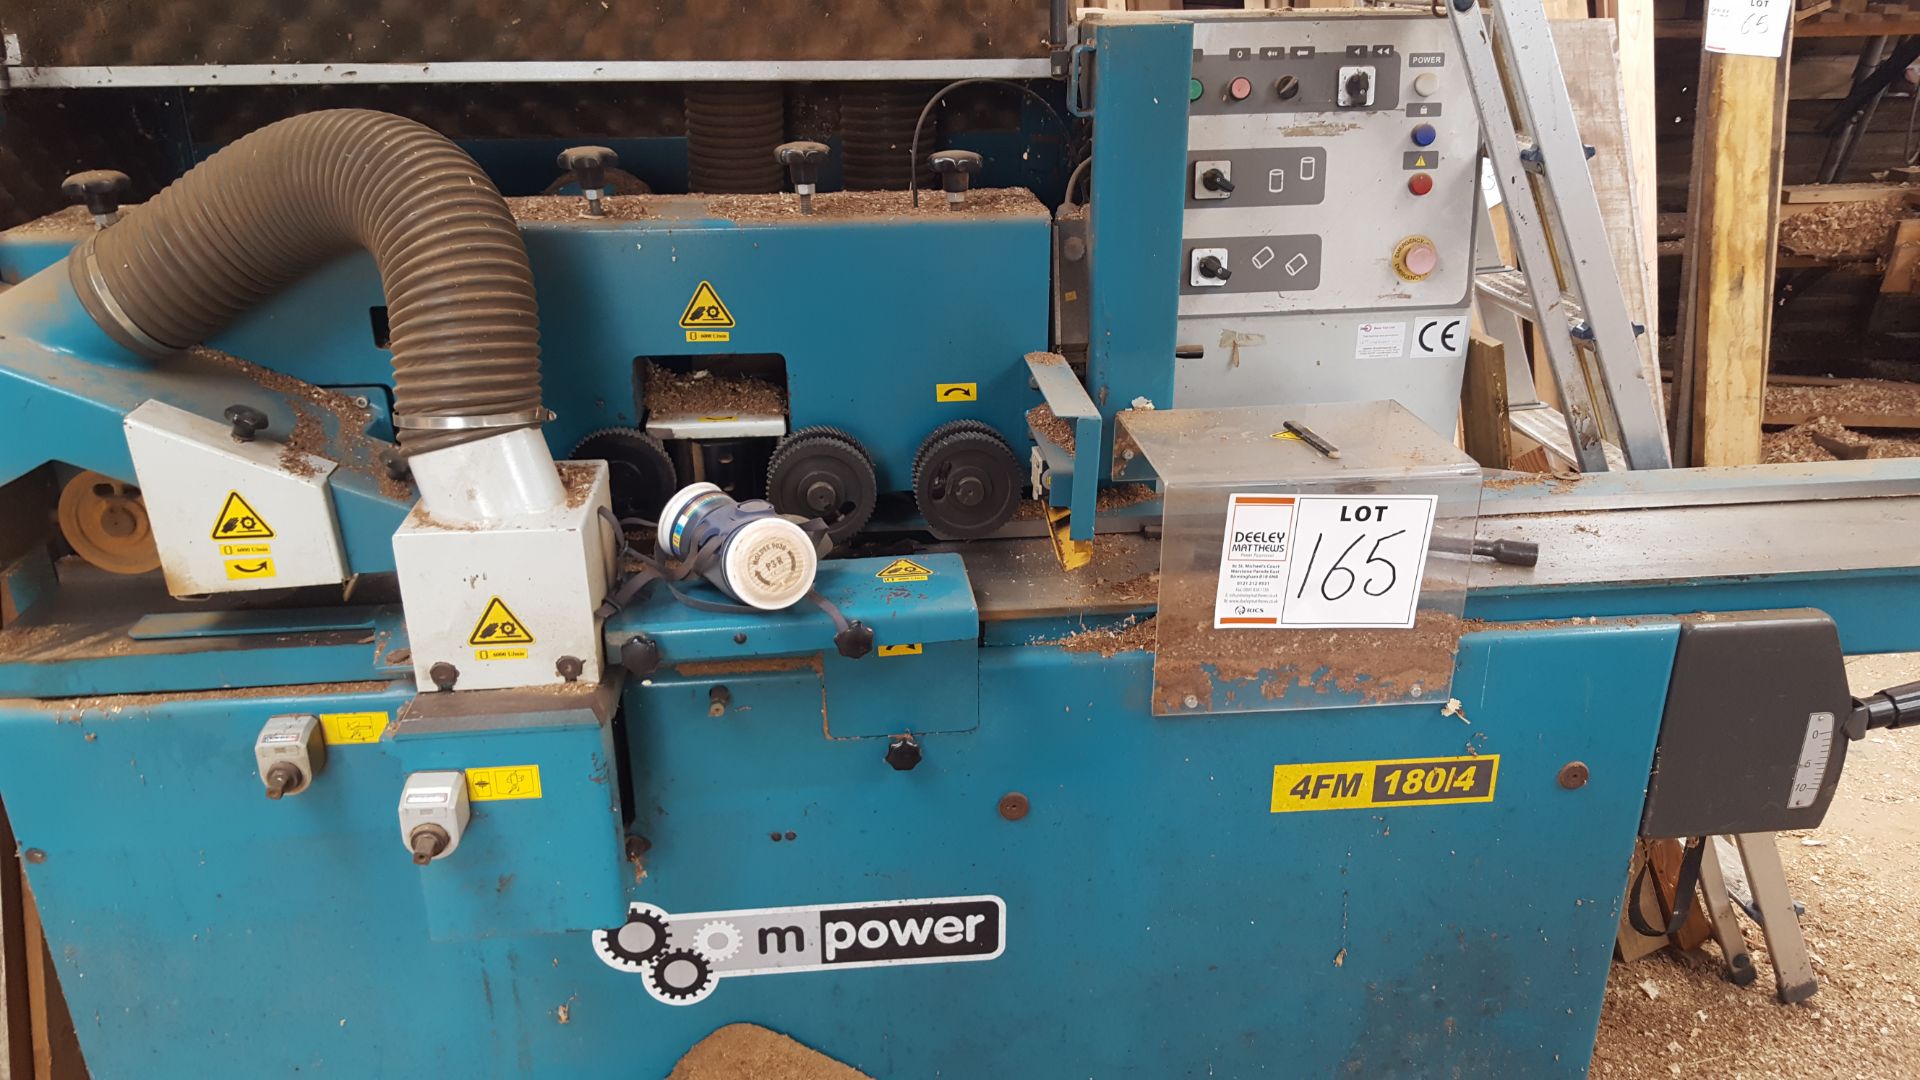 M Power 4 FM 180/4 4 sided PLANER, serial no 425640